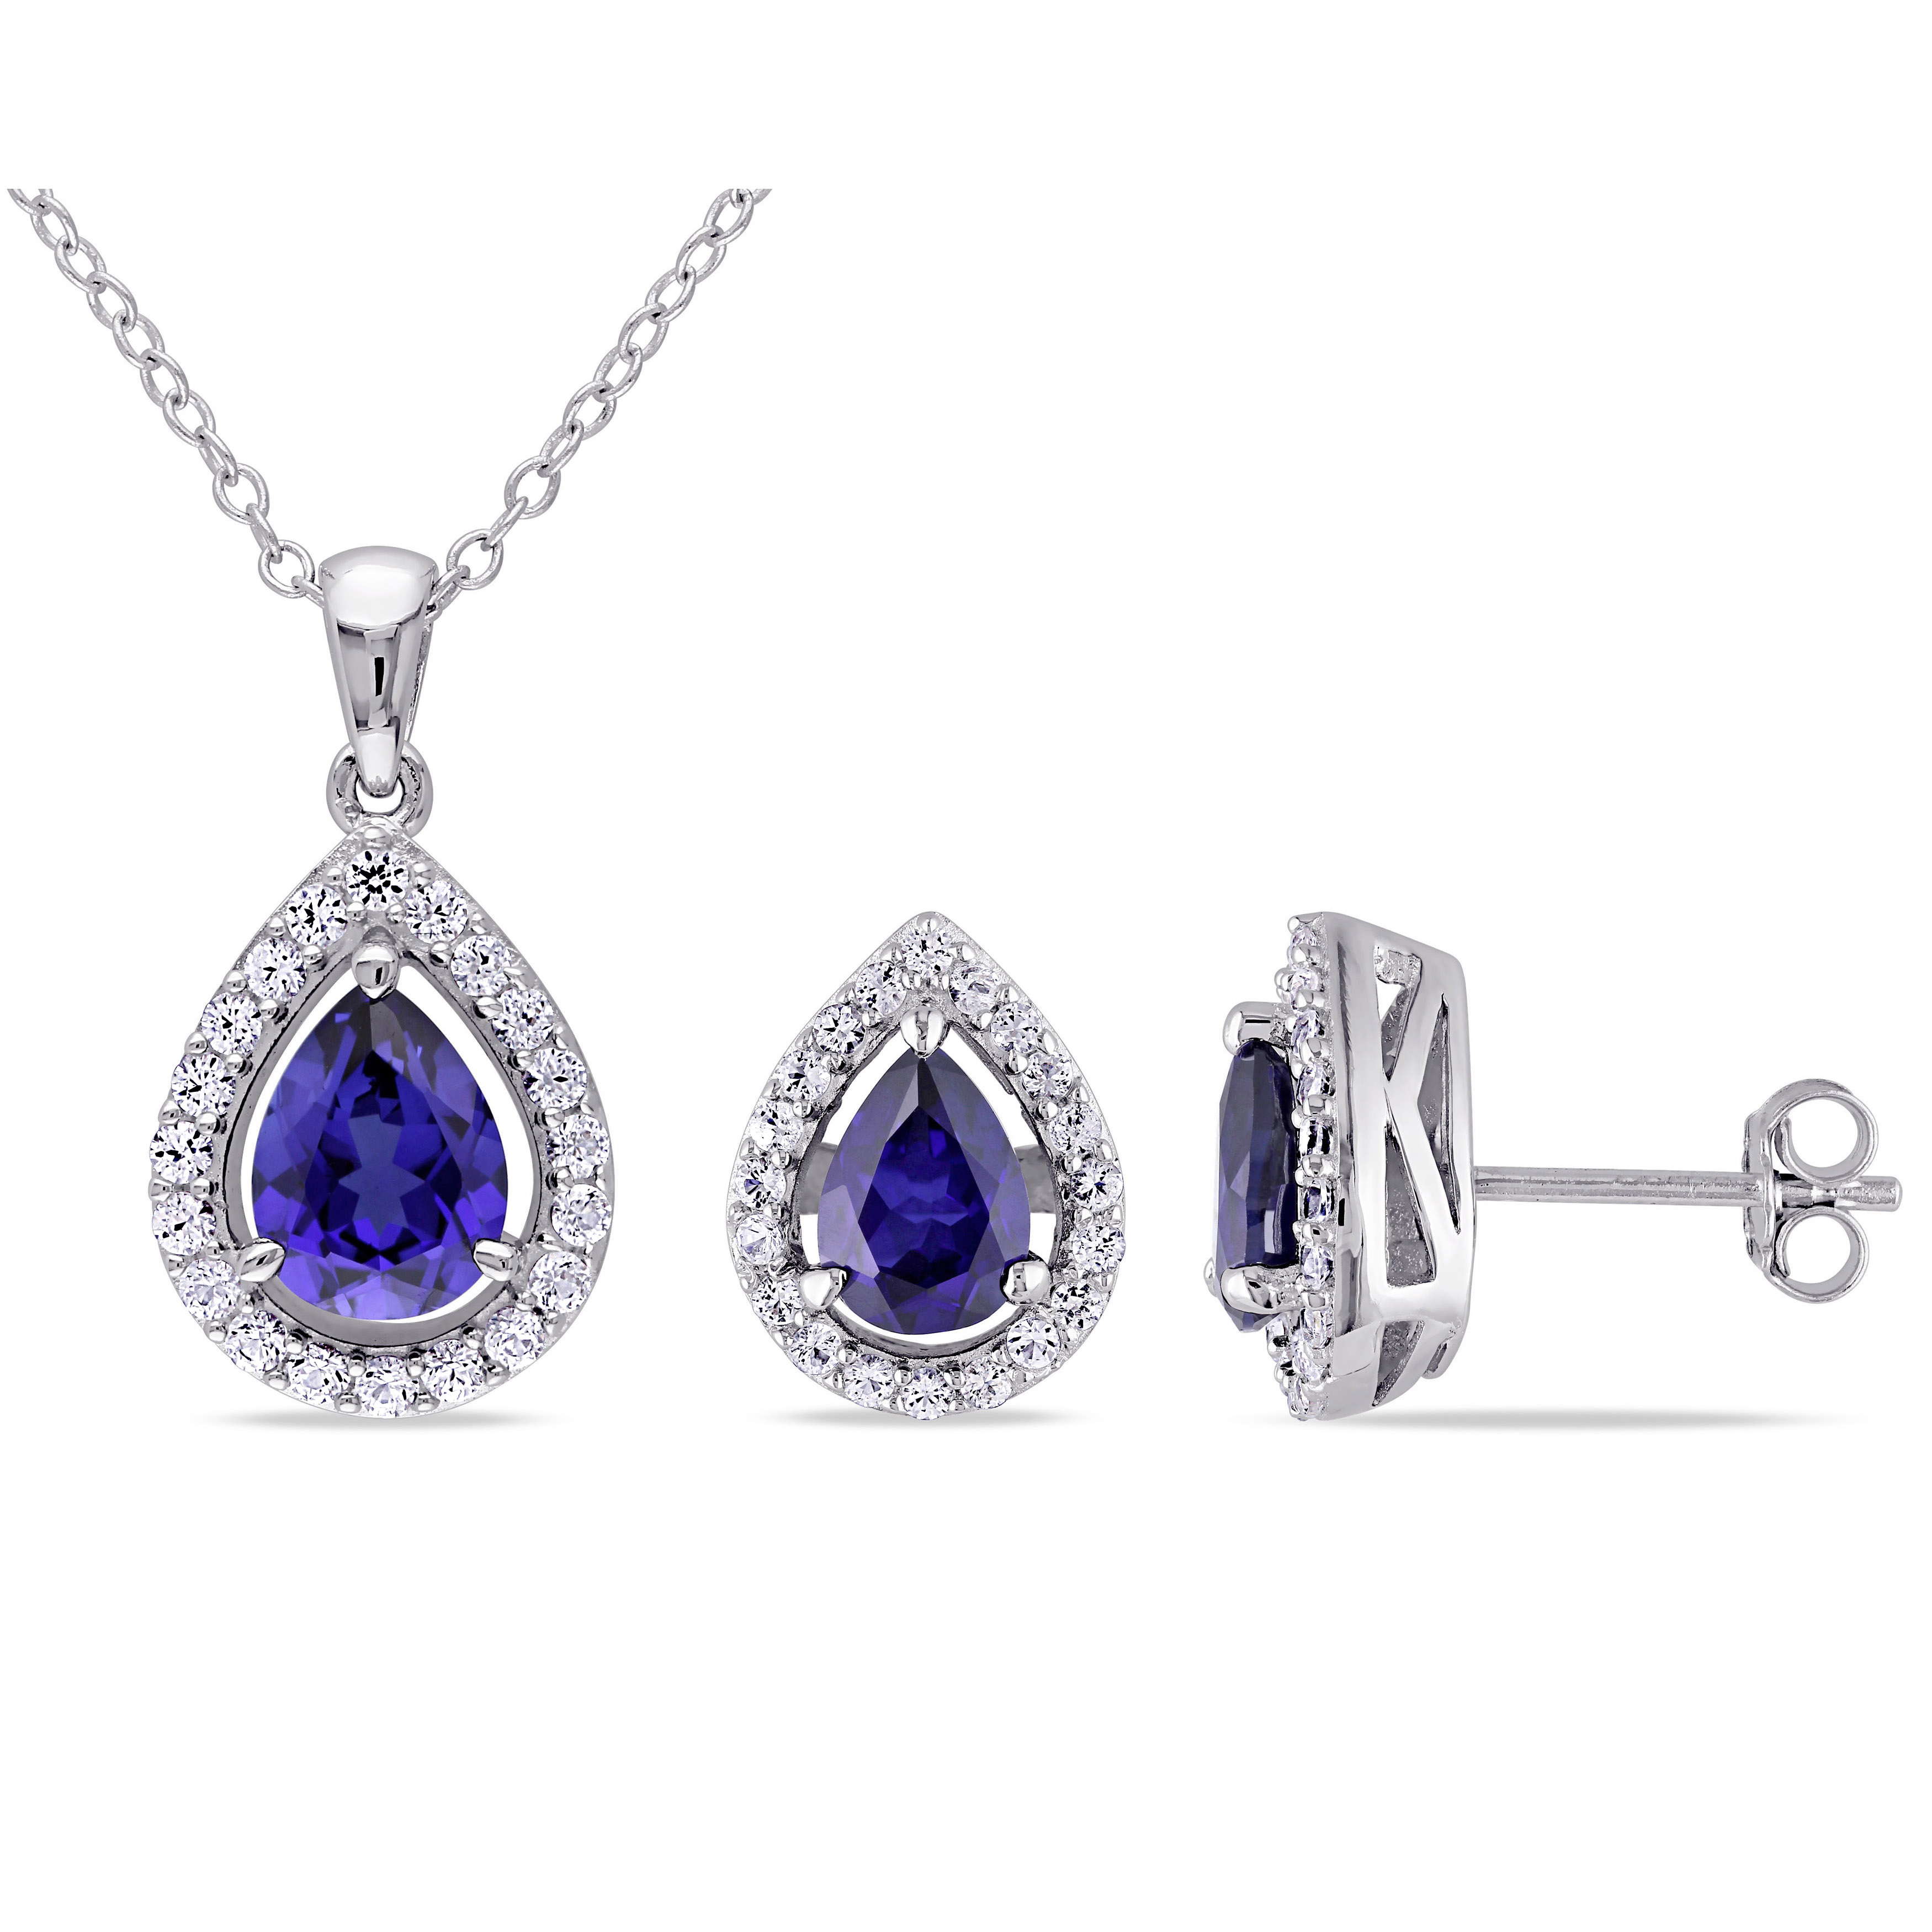 4 7/8 CT TGW Created Blue Sapphire Created White Sapphire Set With Chain in Sterling Silver